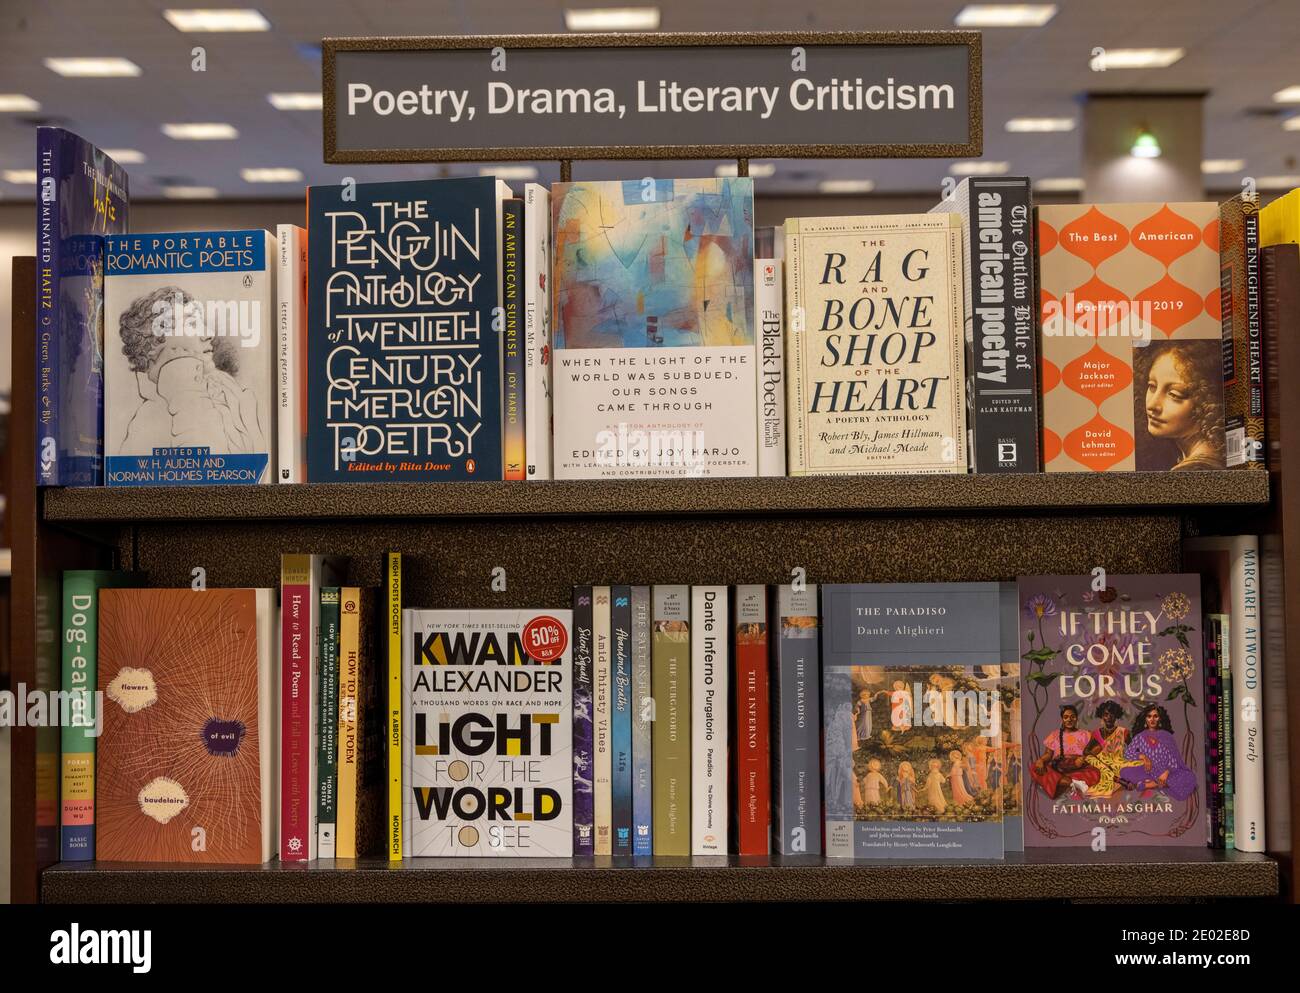 poetry, drama and literary criticism books on shelves, Barnes and Noble, USA Stock Photo